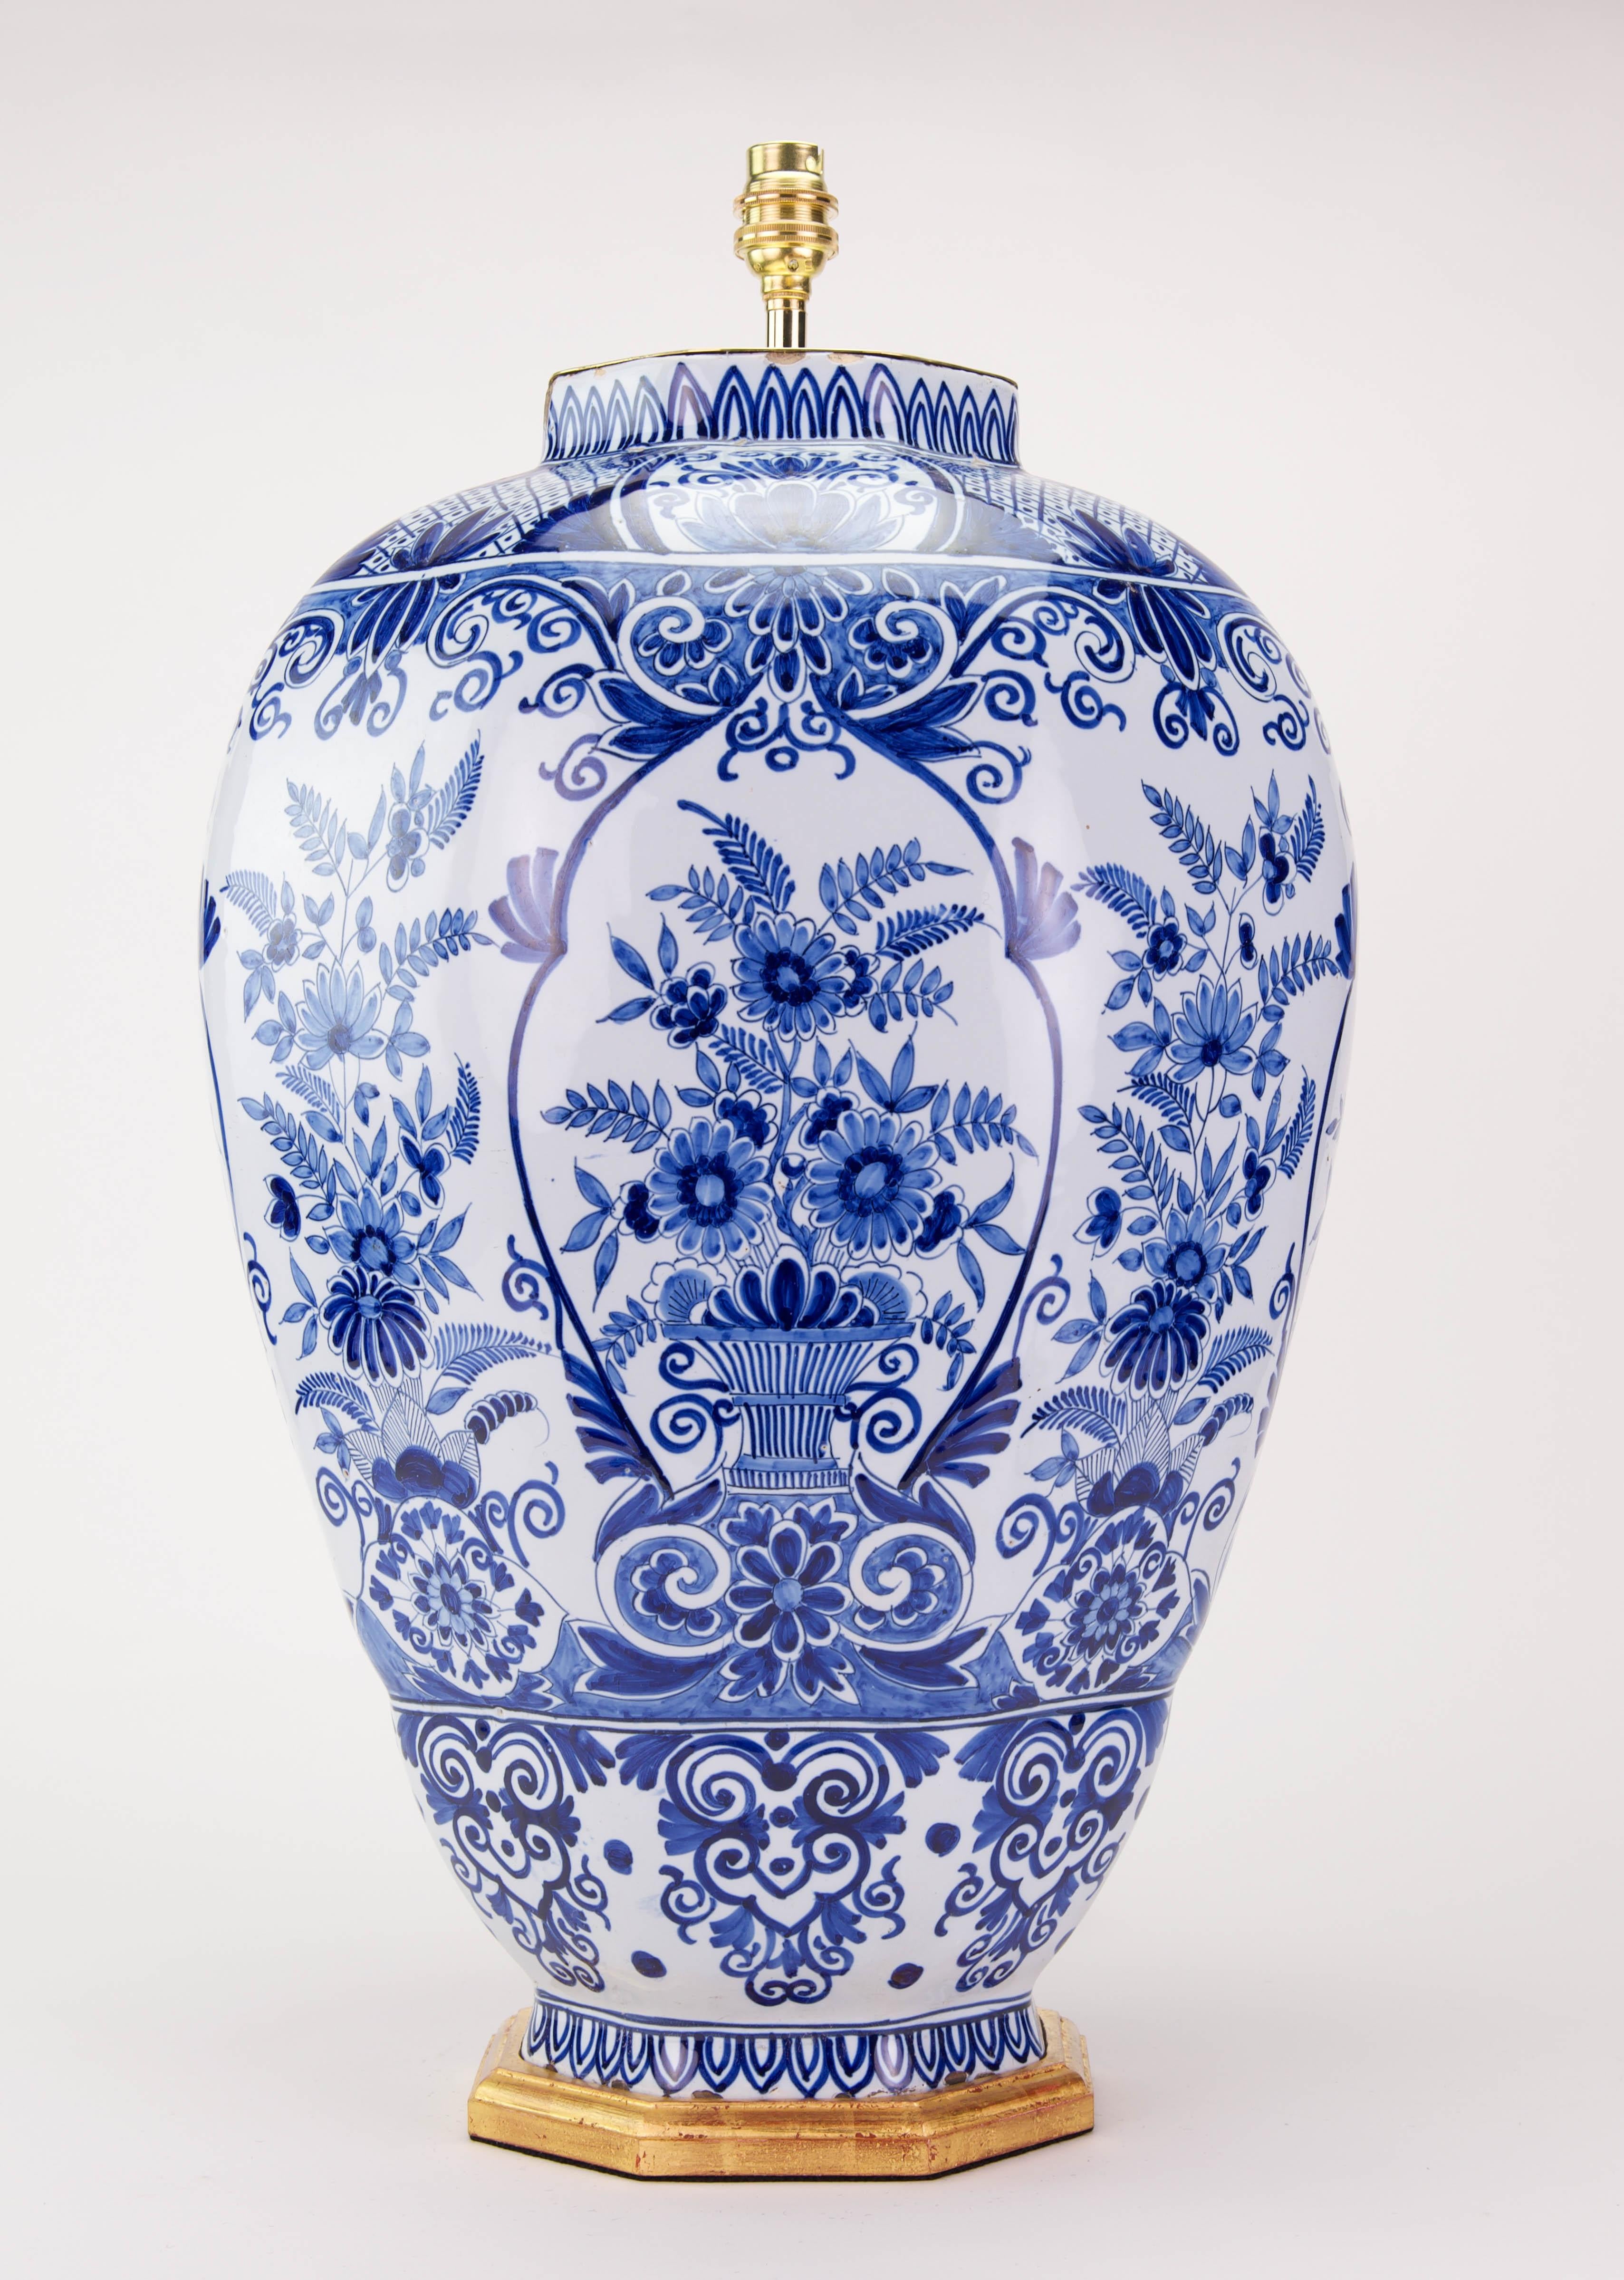 A fine large Dutch Delft blue and white vase, of hexagonal form, beautifully decorated trhoughout  in tones of blue on a white ground, with  foliage and flowers and further stylised motifs, now mounted as a lamp with a giltwood base.

Height of